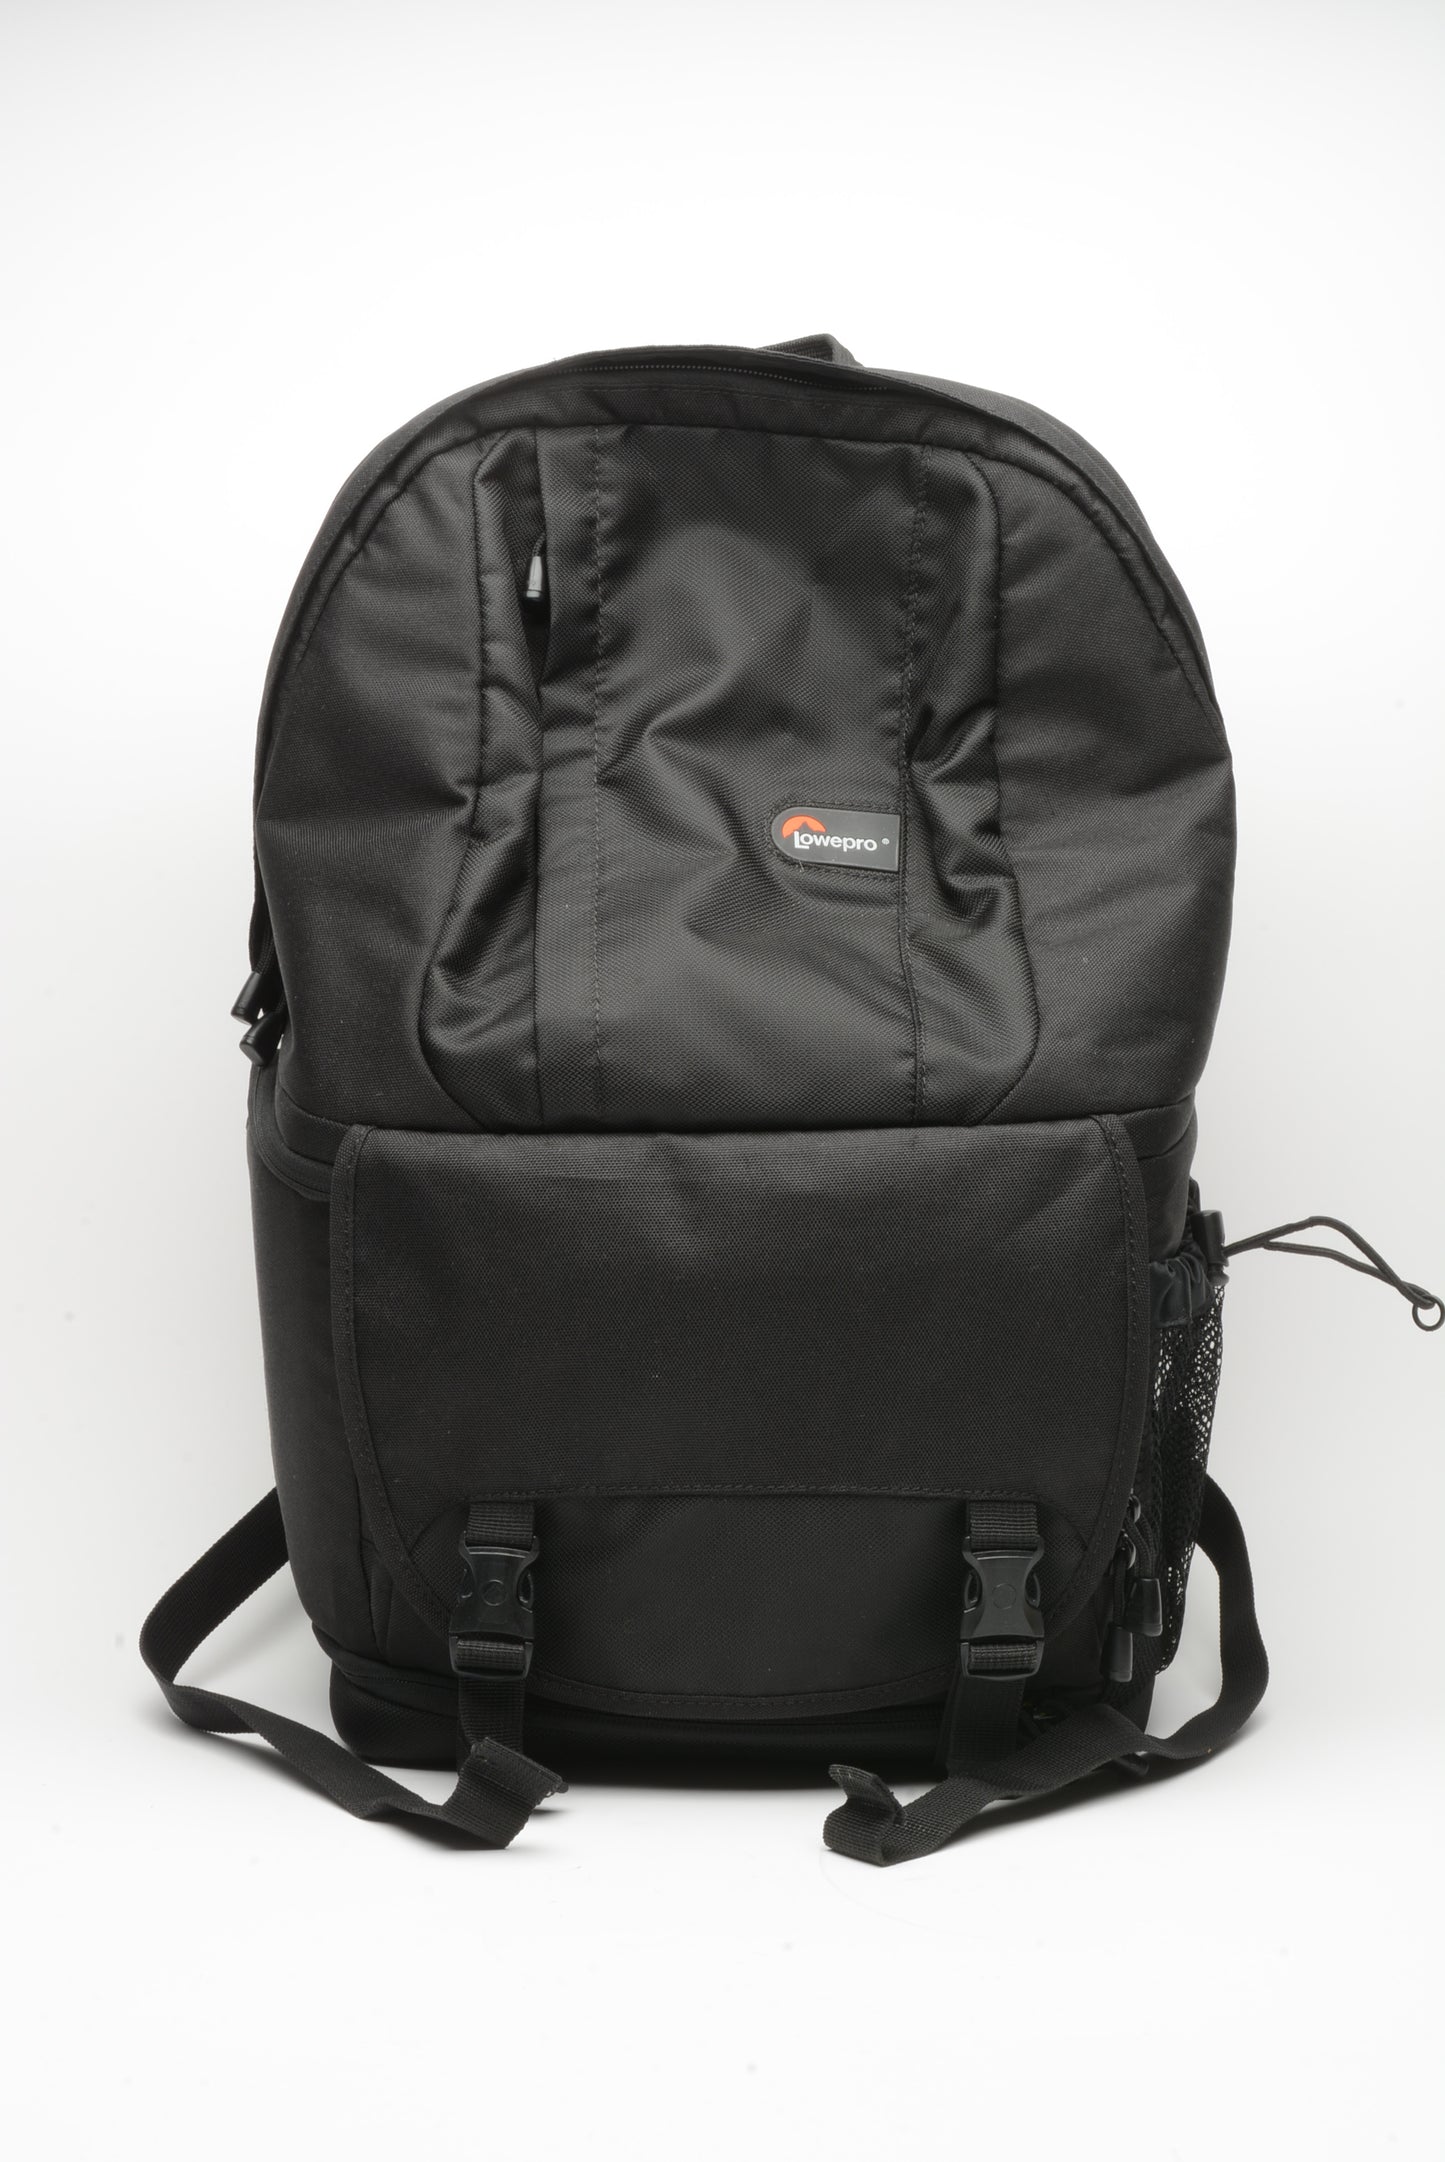 Lowepro Fastpack 200 photo backpack, very clean, barely used